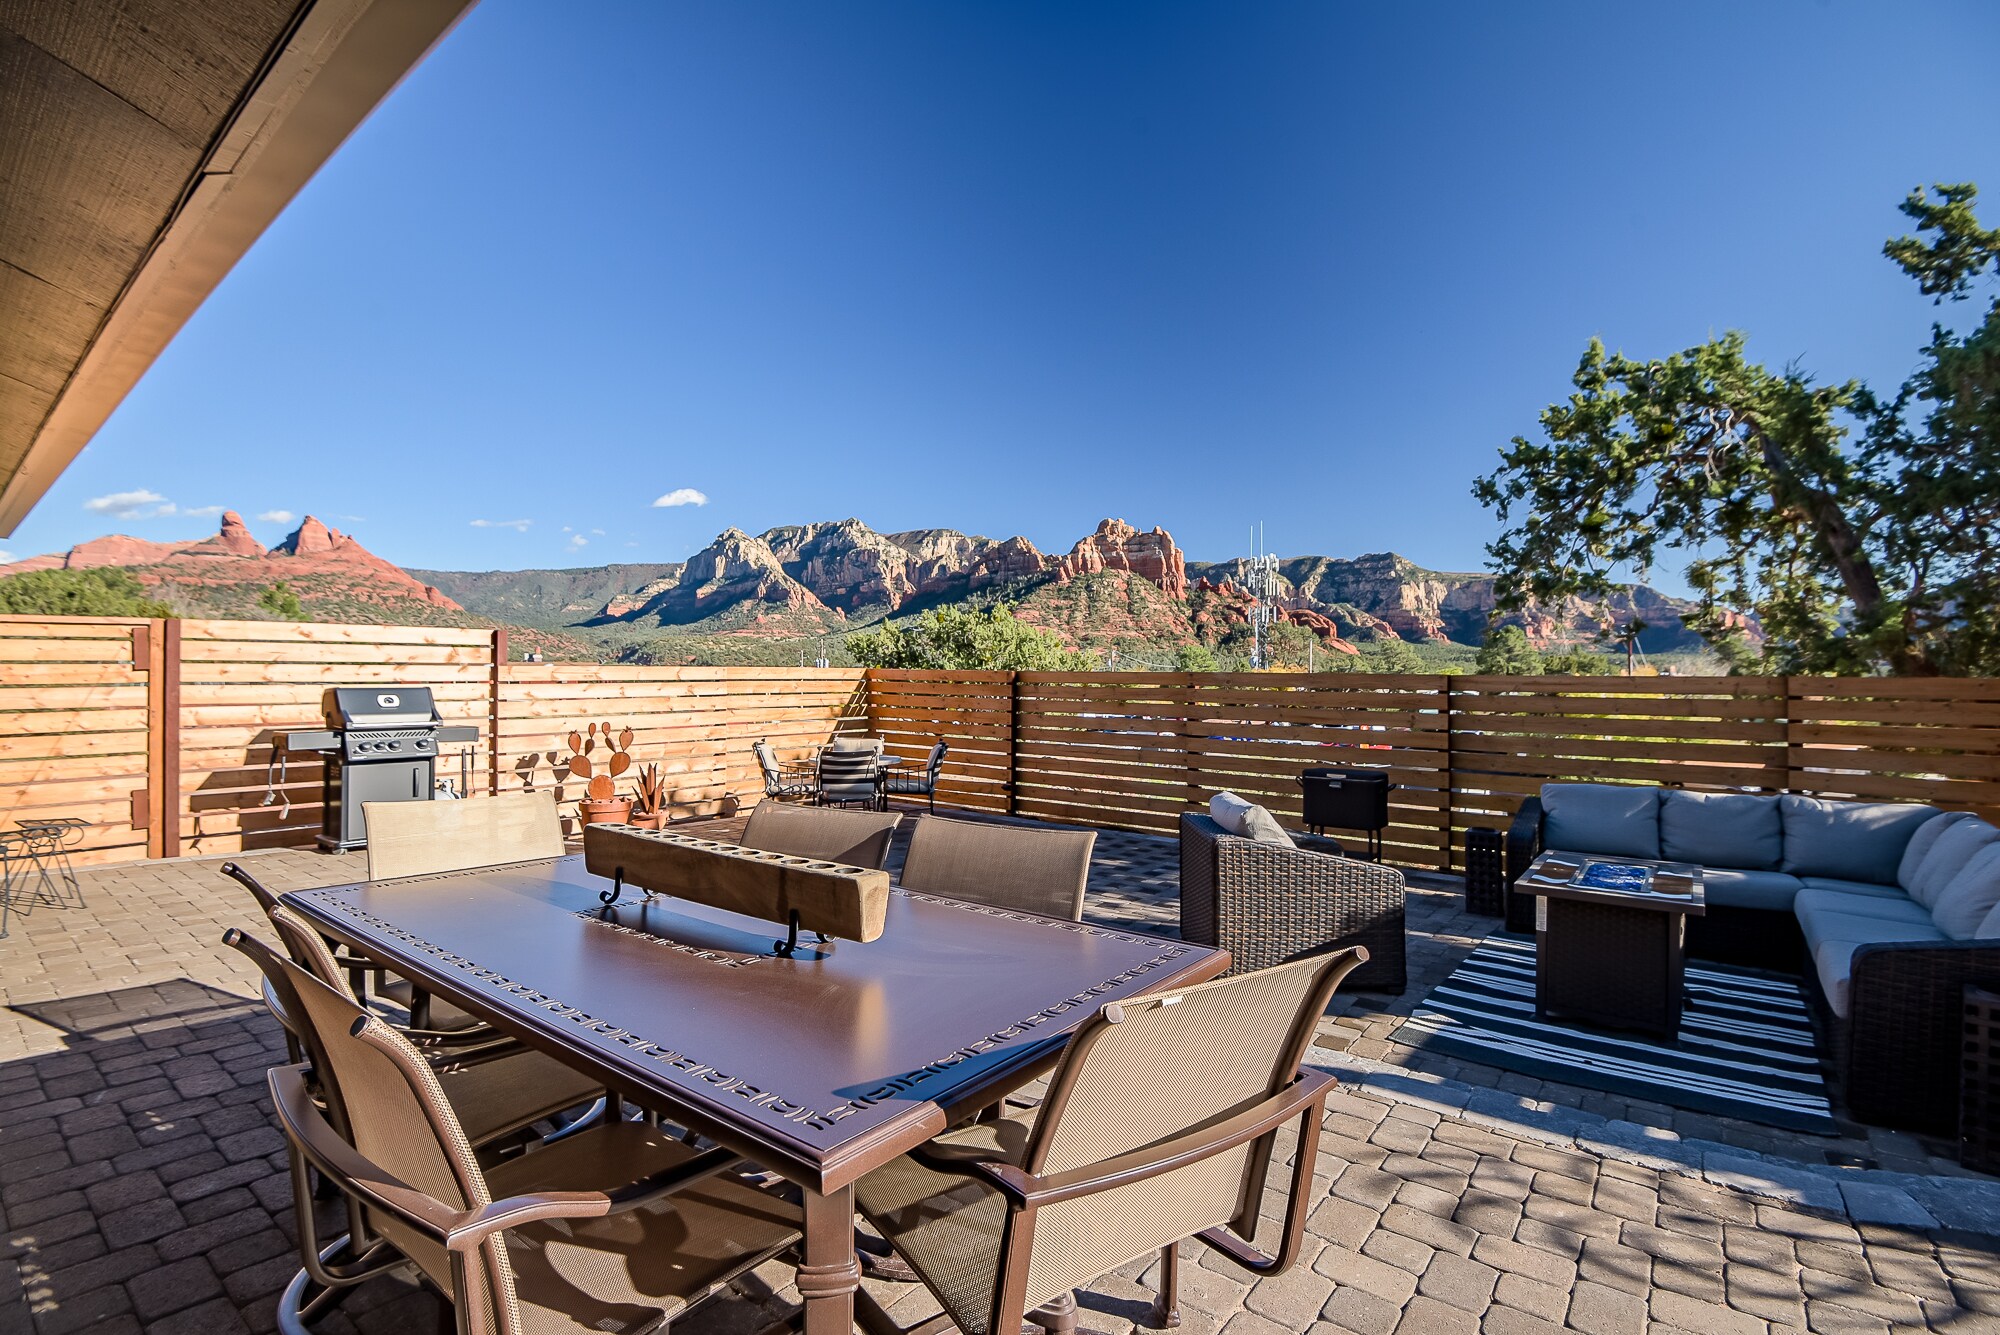 Red Rock Views From the Backyard!